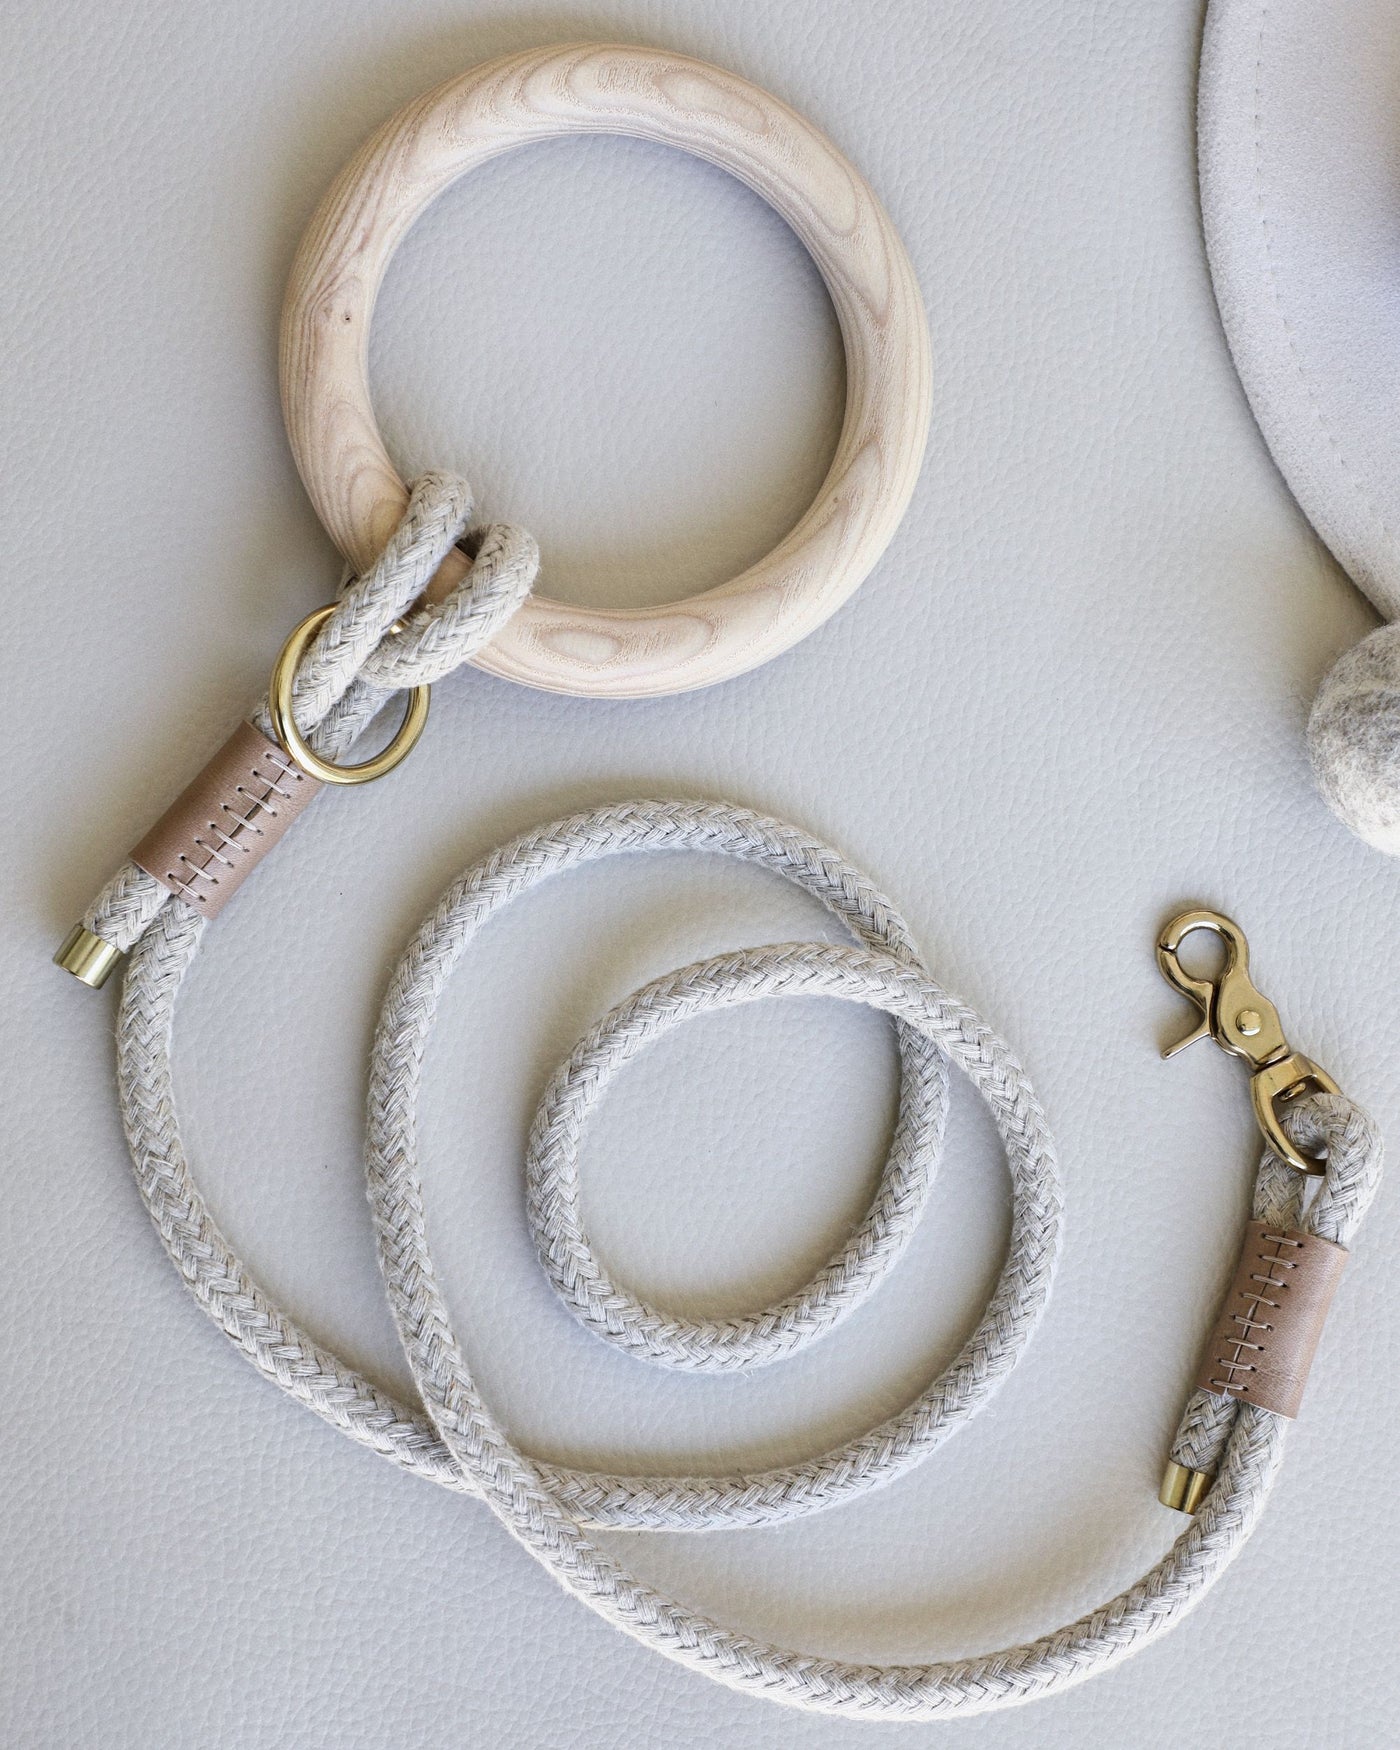 Rope leash connected to round dowel with taupe leather accents and gold hardware